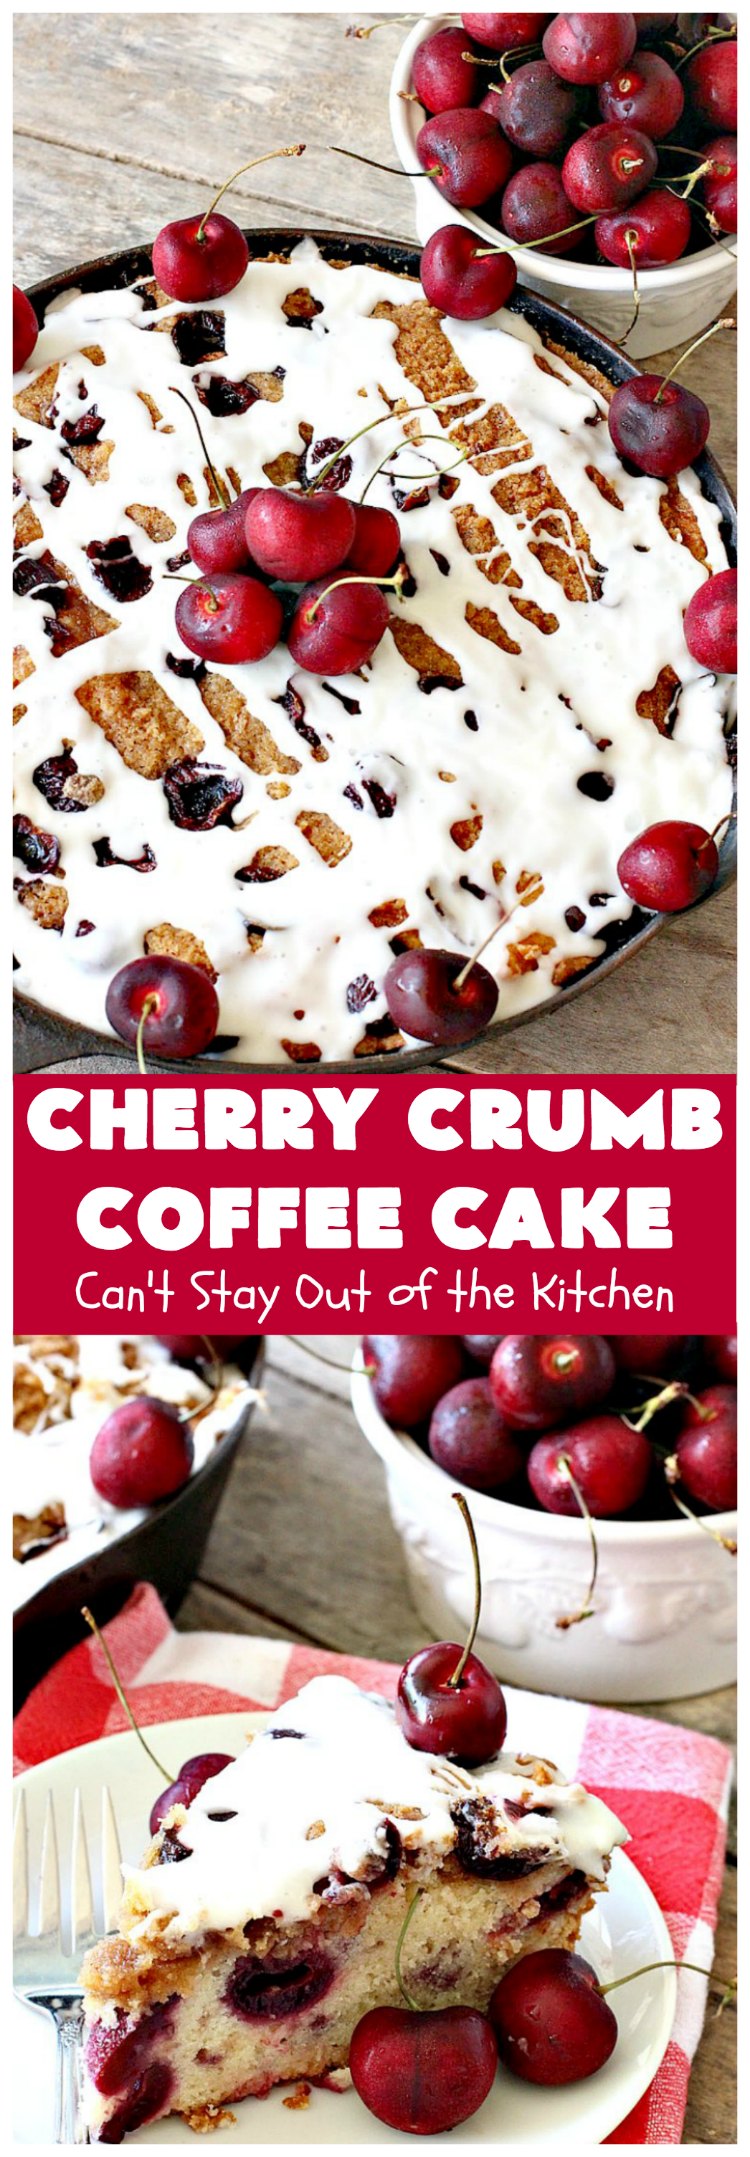 Cherry Crumb Coffee Cake | Can't Stay Out of the Kitchen